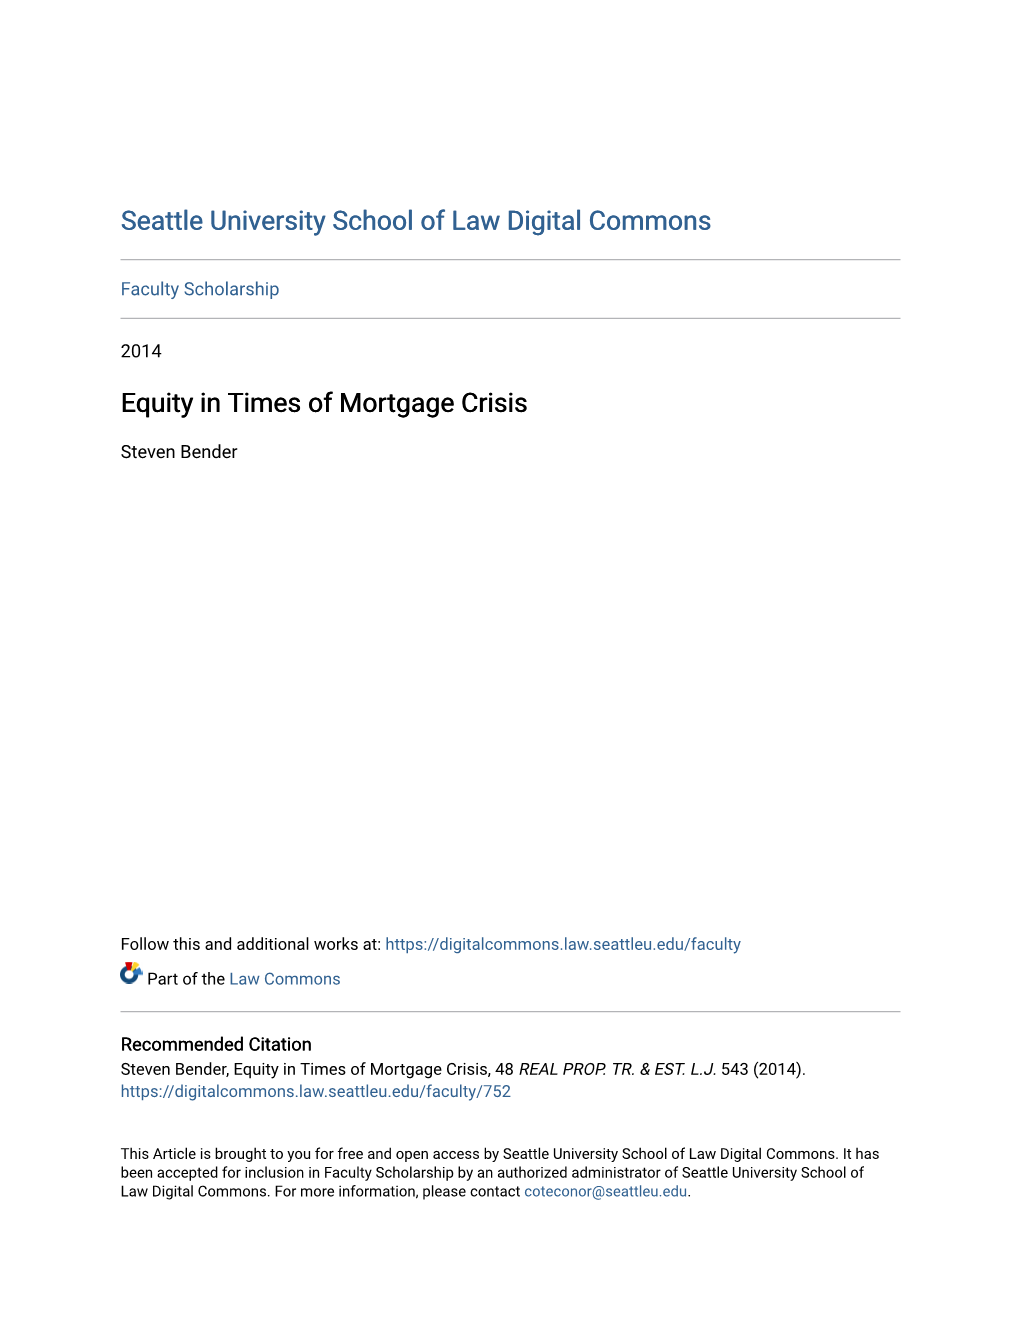 Equity in Times of Mortgage Crisis